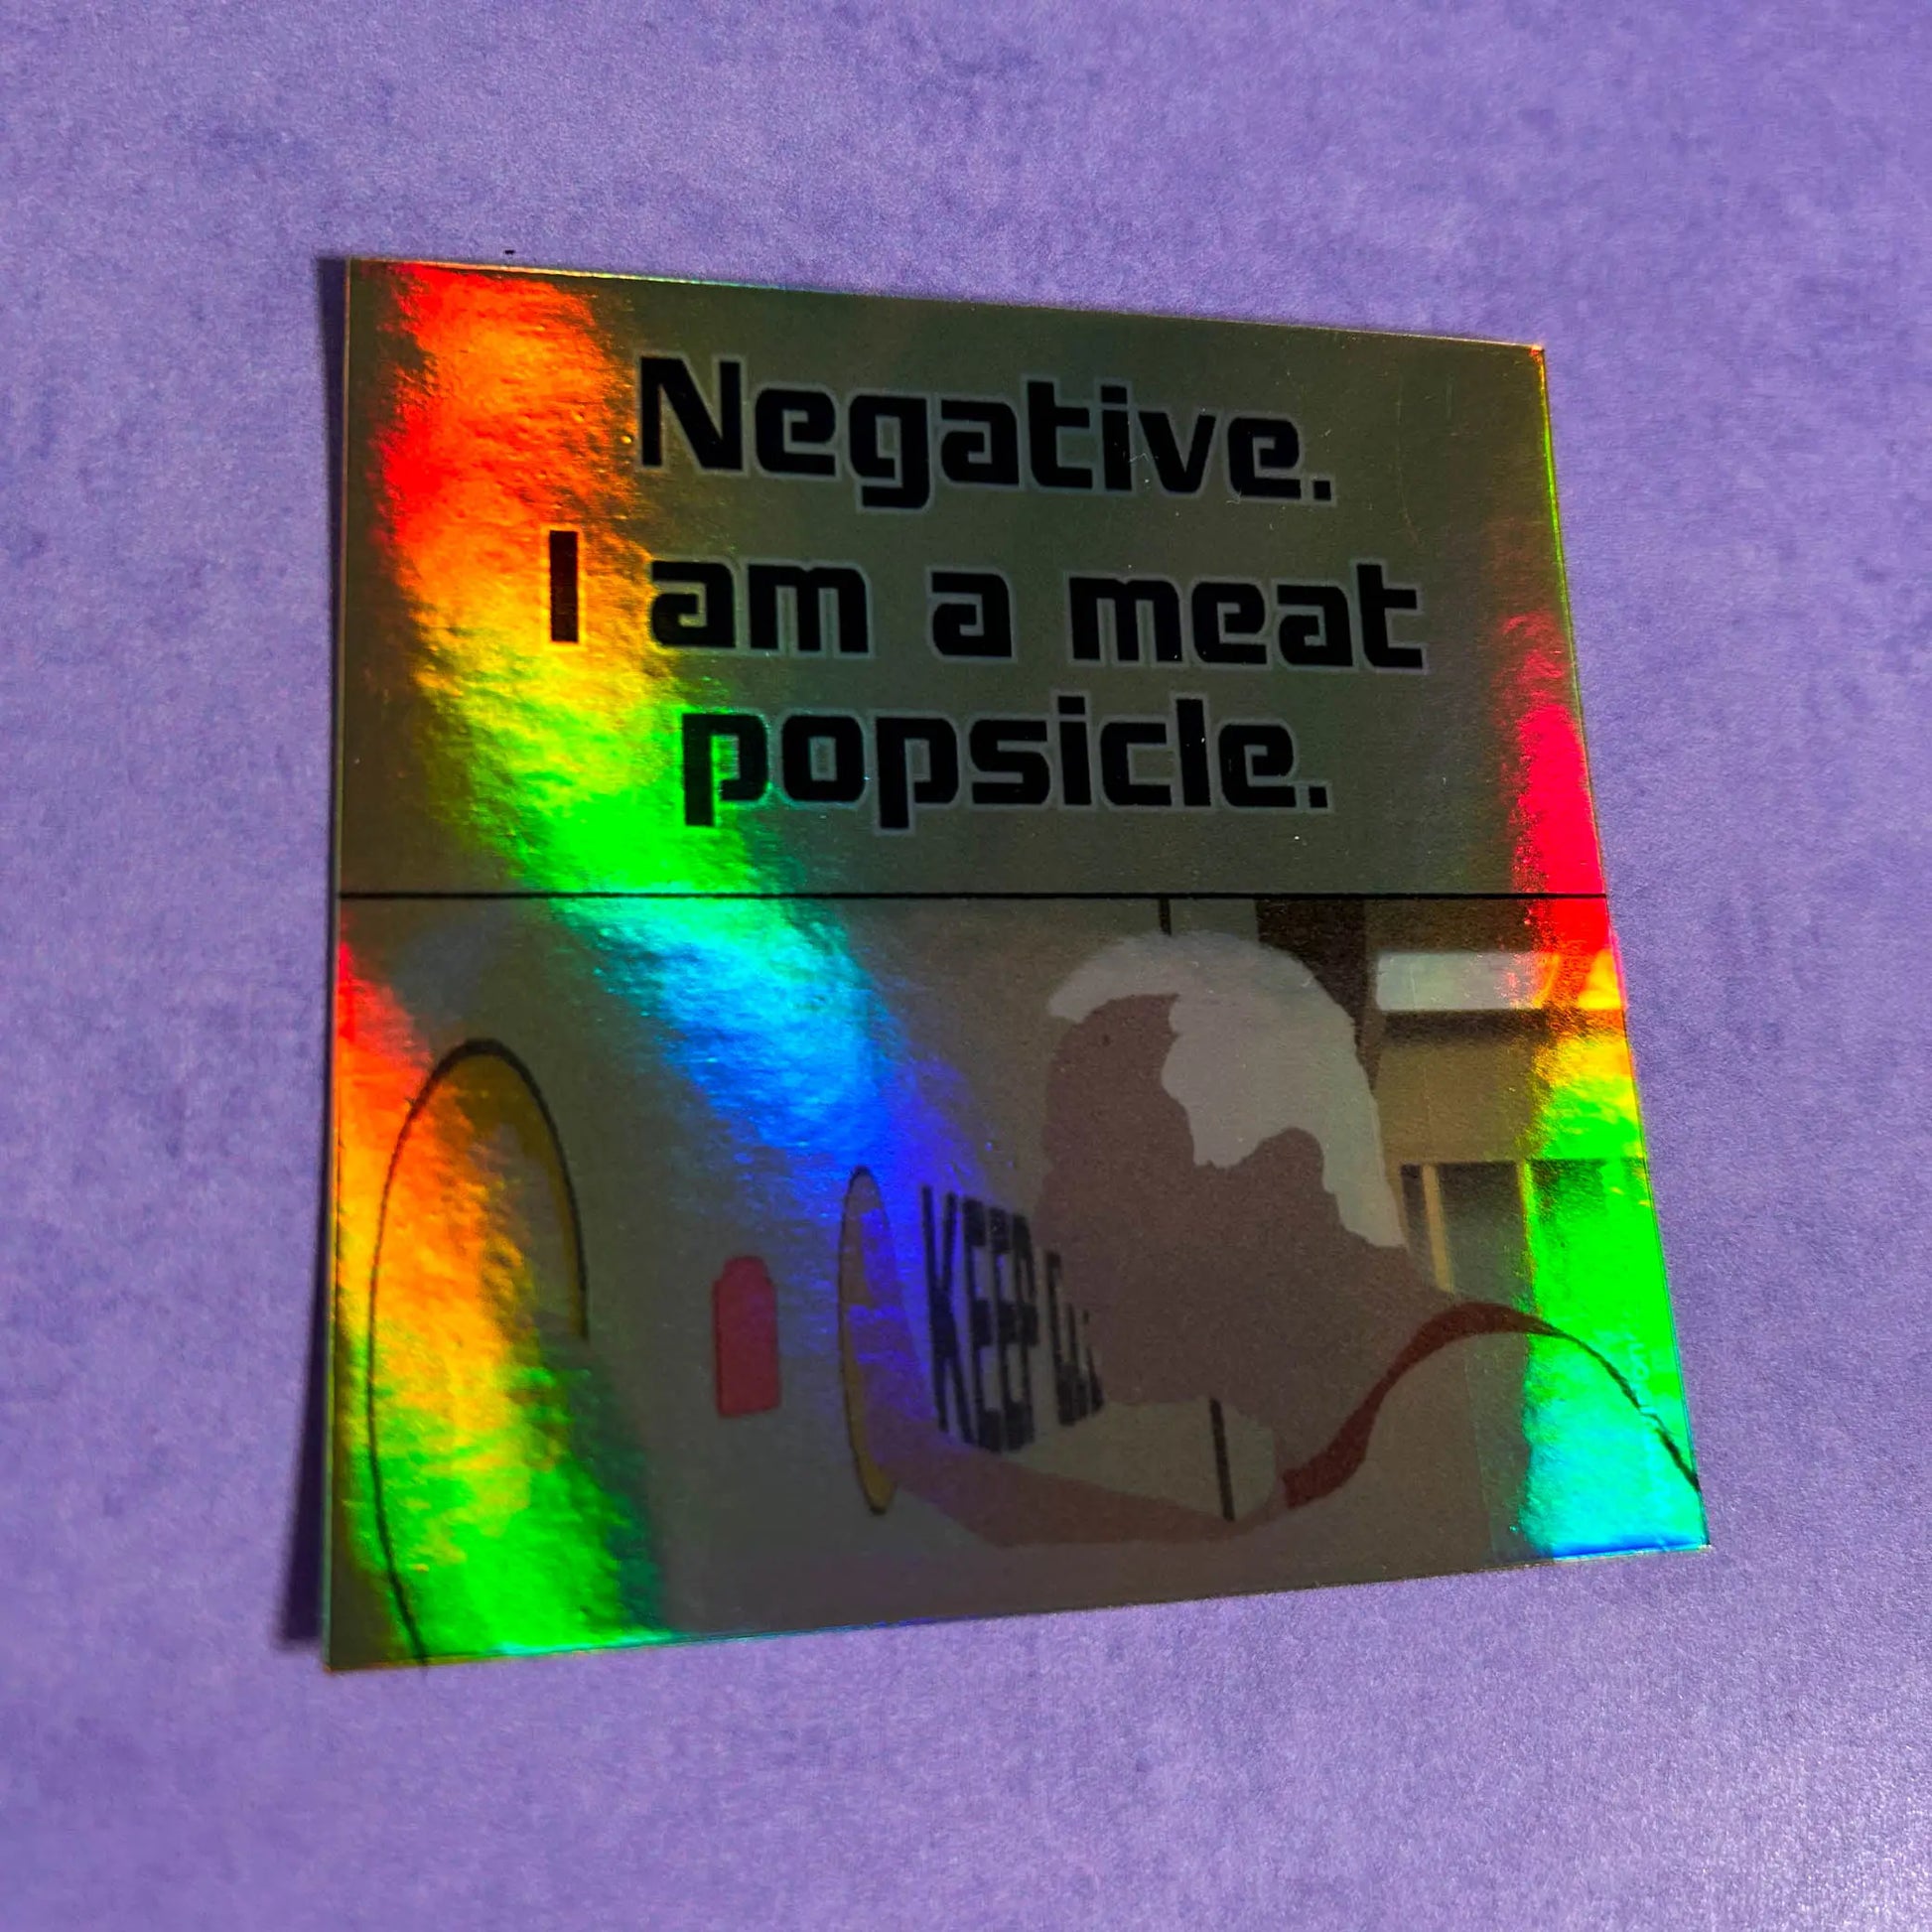 Meat Popsicle Holographic 3" Vinyl Sticker tilted right on a purple background